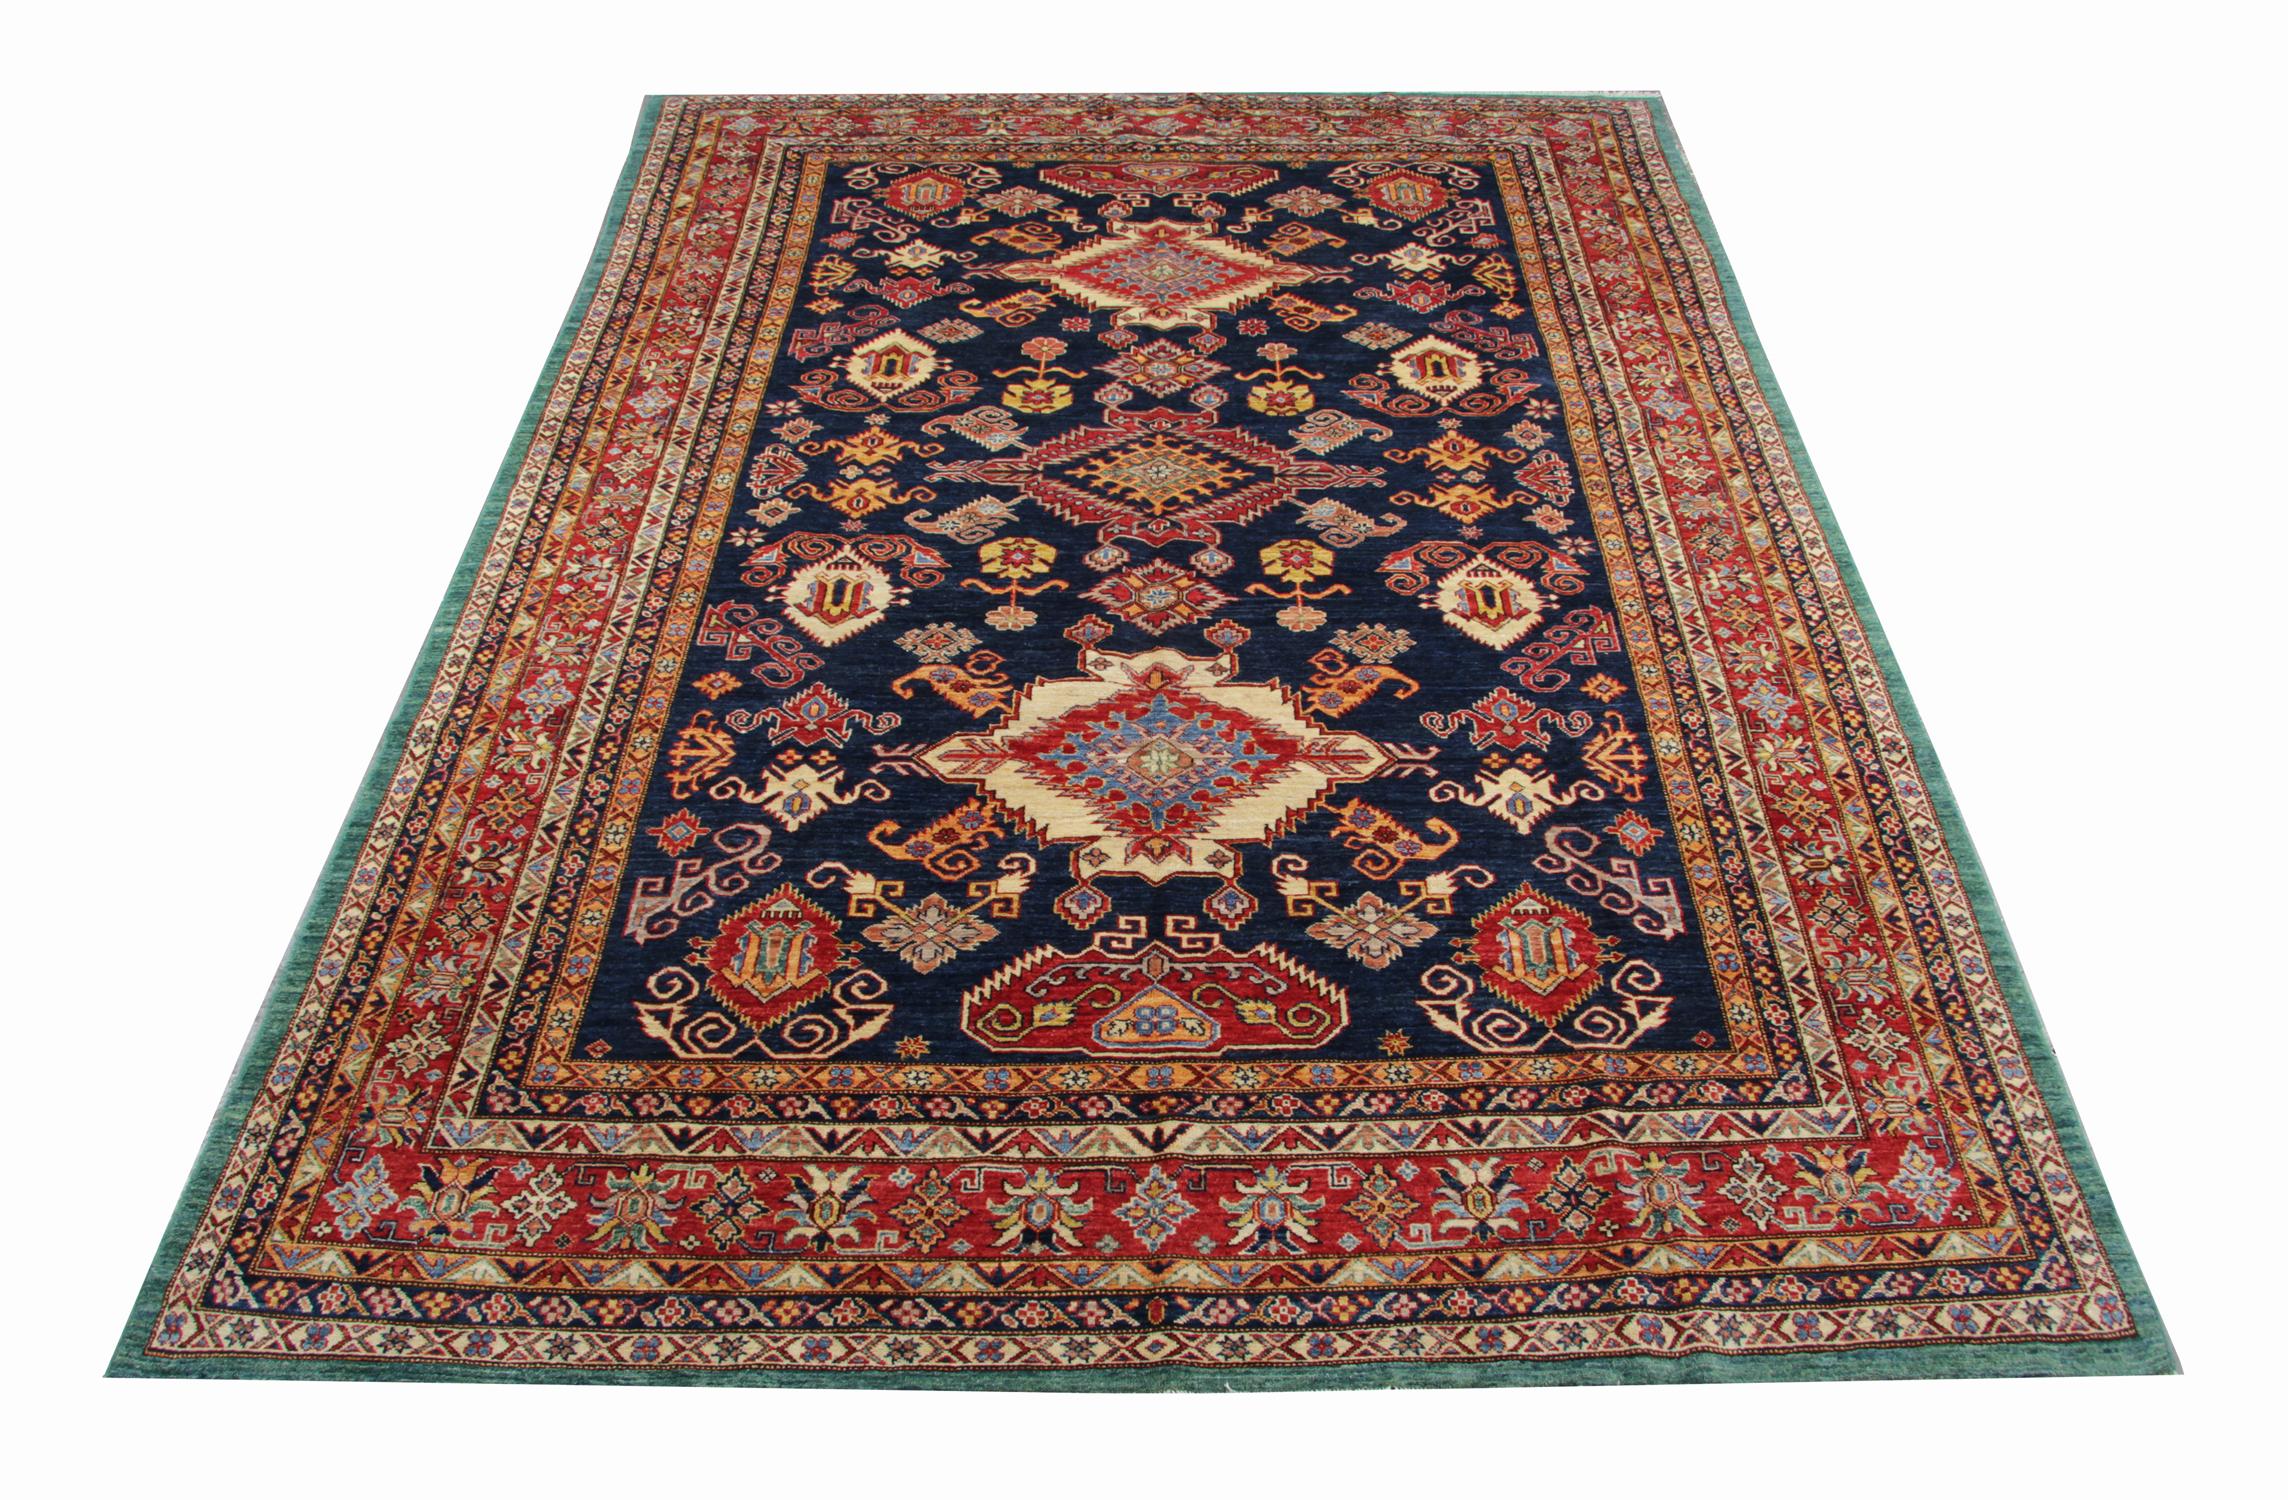 A beautiful new traditional Afghan Kazak rug features a conventional tribal medallion design woven in beige, navy blue and green accents through the centre on a red field. The design is then finished with a highly-detailed repeat pattern border that